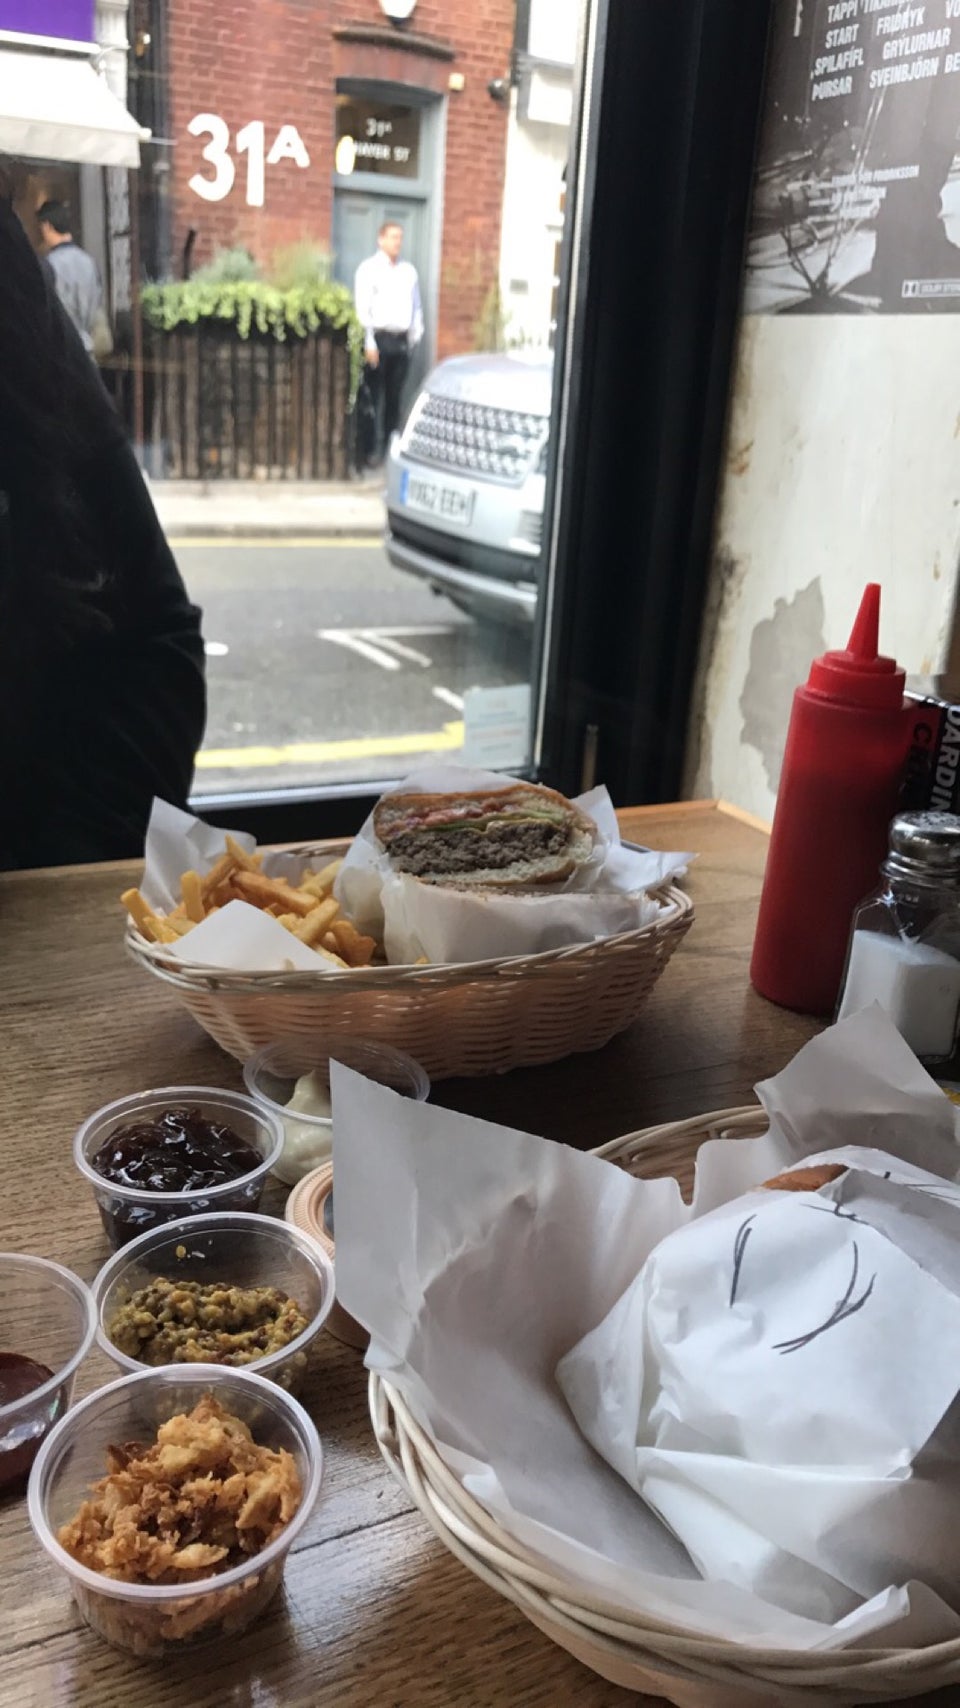 Photo of Tommi's Burger Joint (Marylebone)